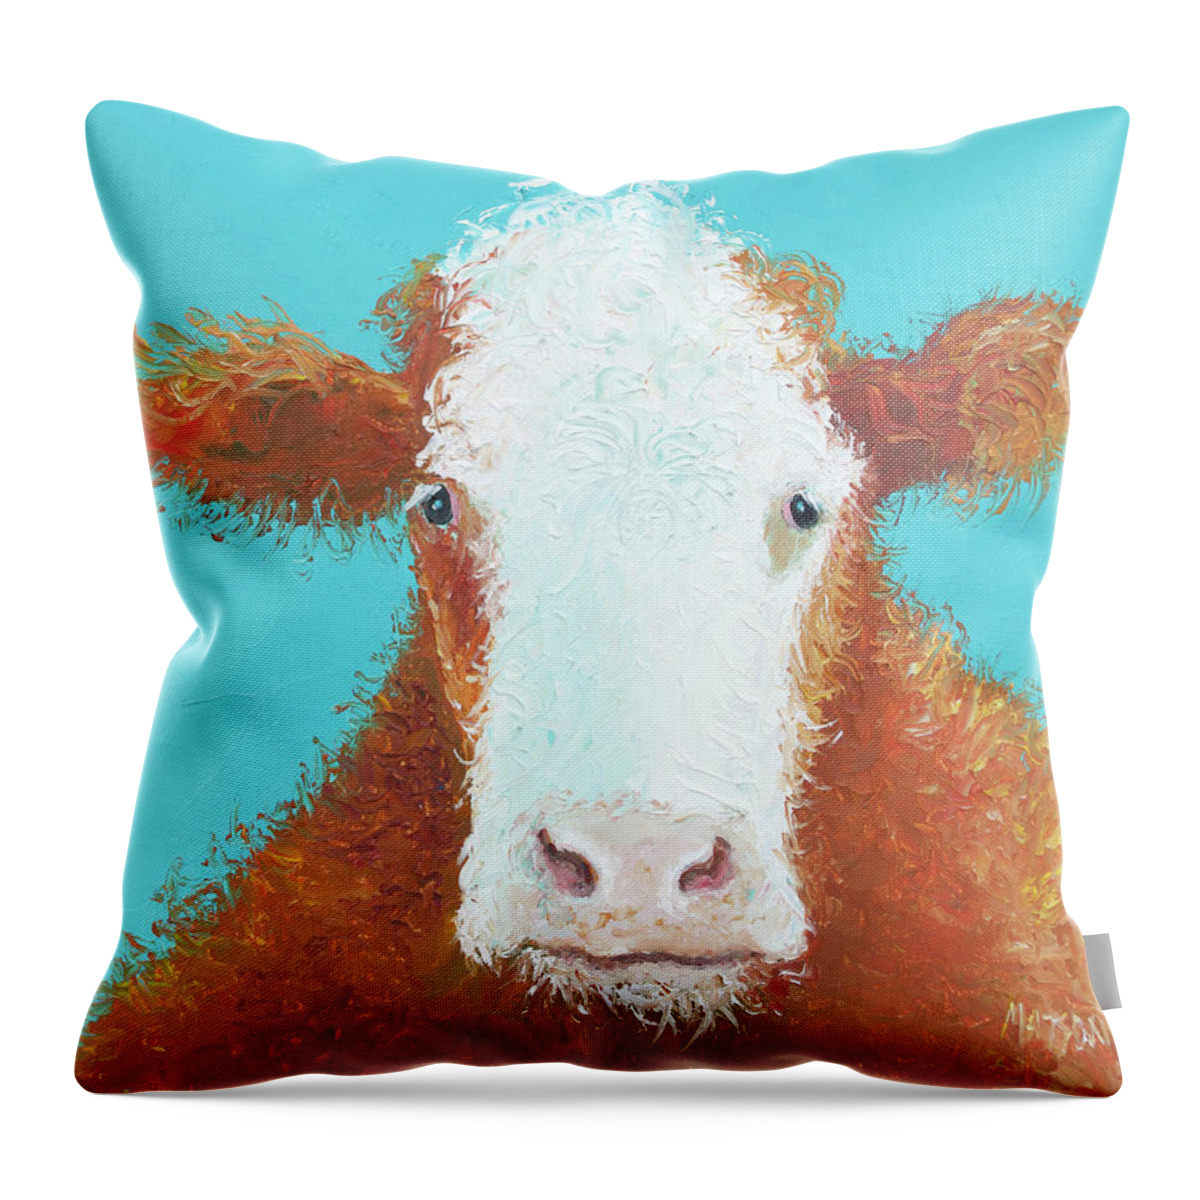 Cow Throw Pillow featuring the painting Brown Hereford on turquoise by Jan Matson